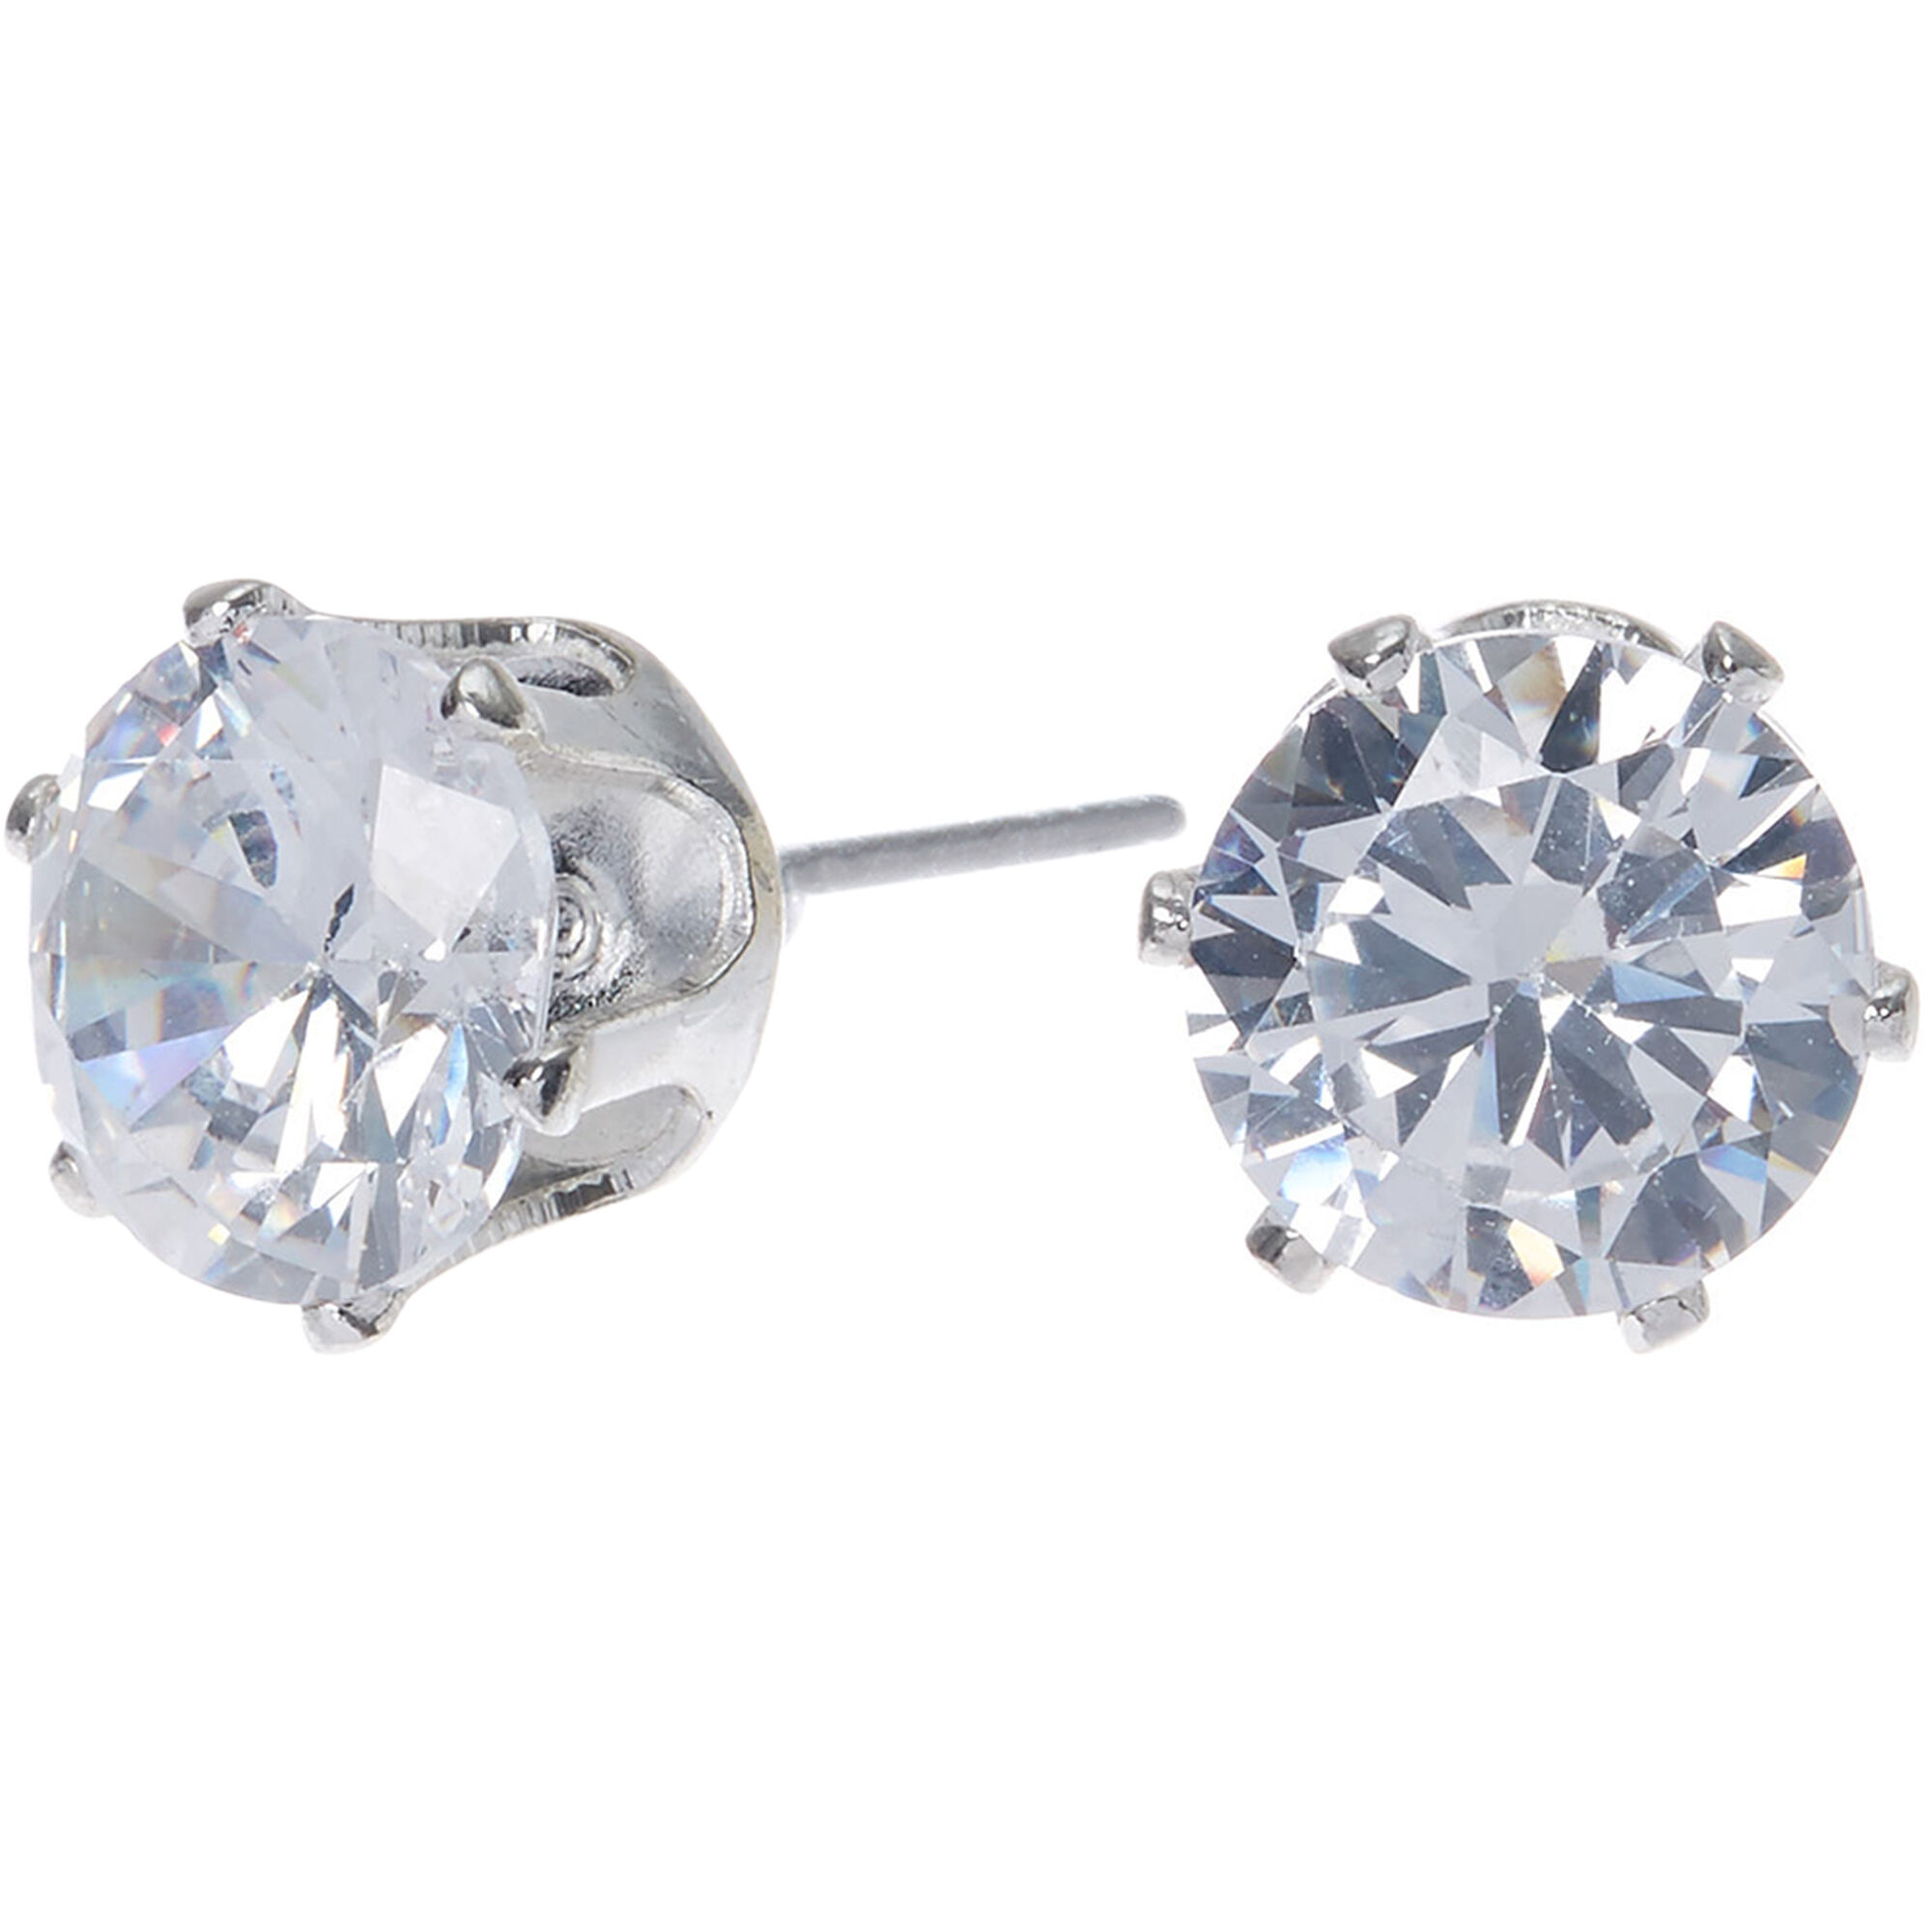 View Claires Tone Cubic Zirconia 8MM Round Stud Earrings Silver information